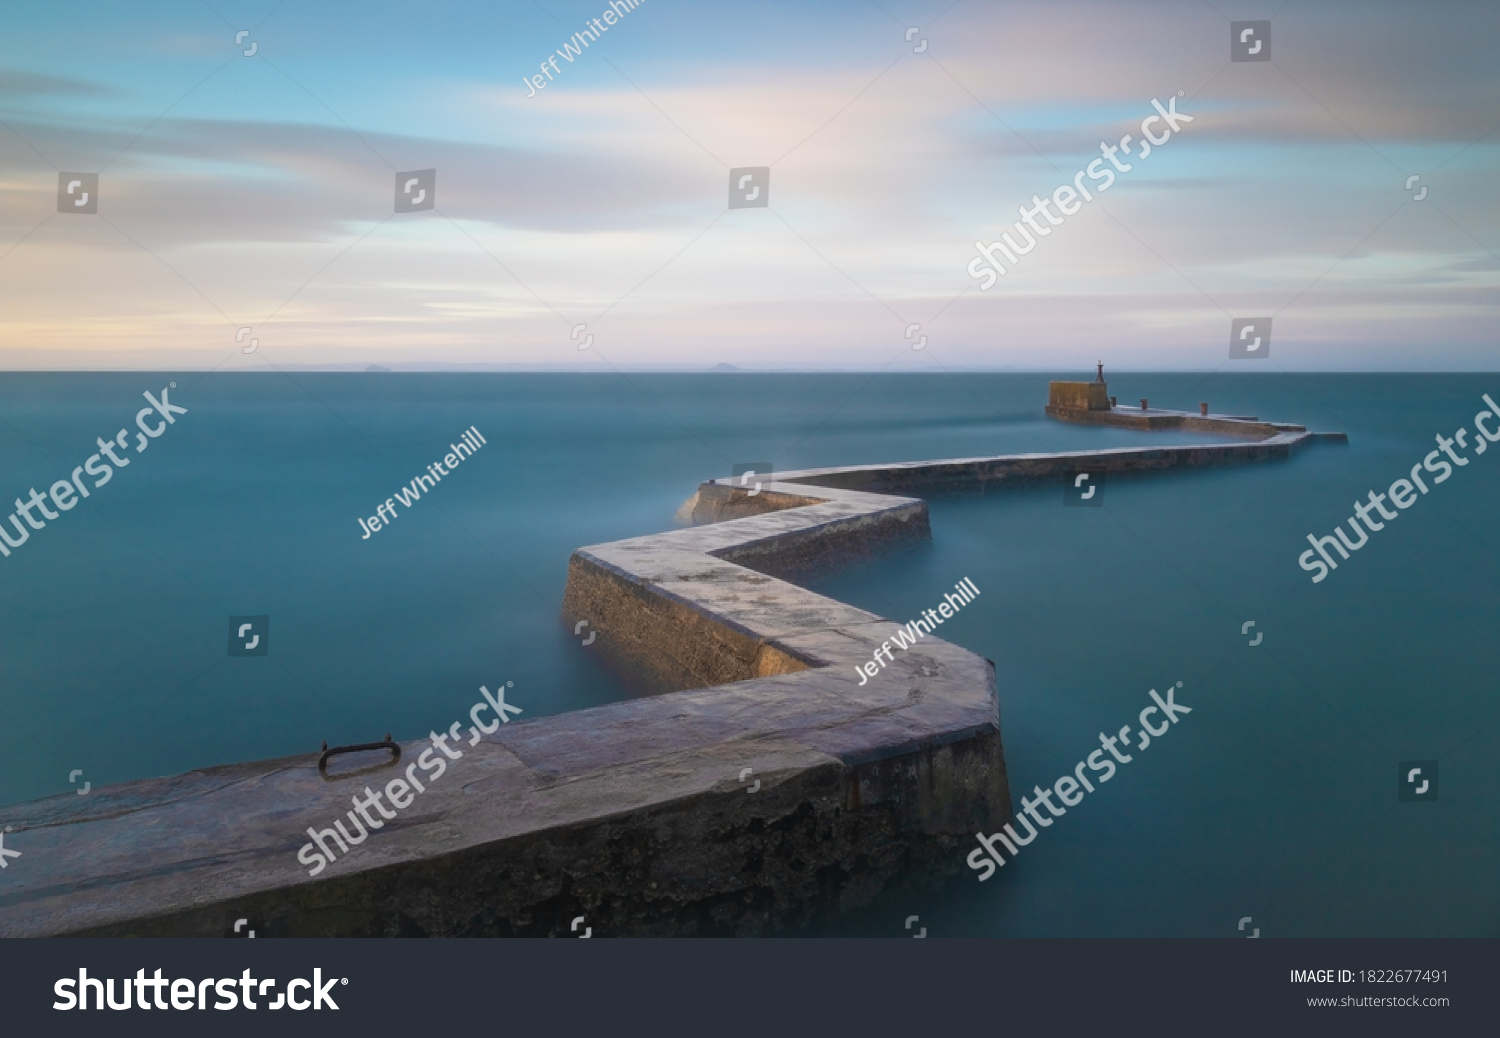 A long exposure shot of the zigzag breakwater at St Monans during some stormy weather - the long exposure smooths out the water giving the appearance of calm #1822677491